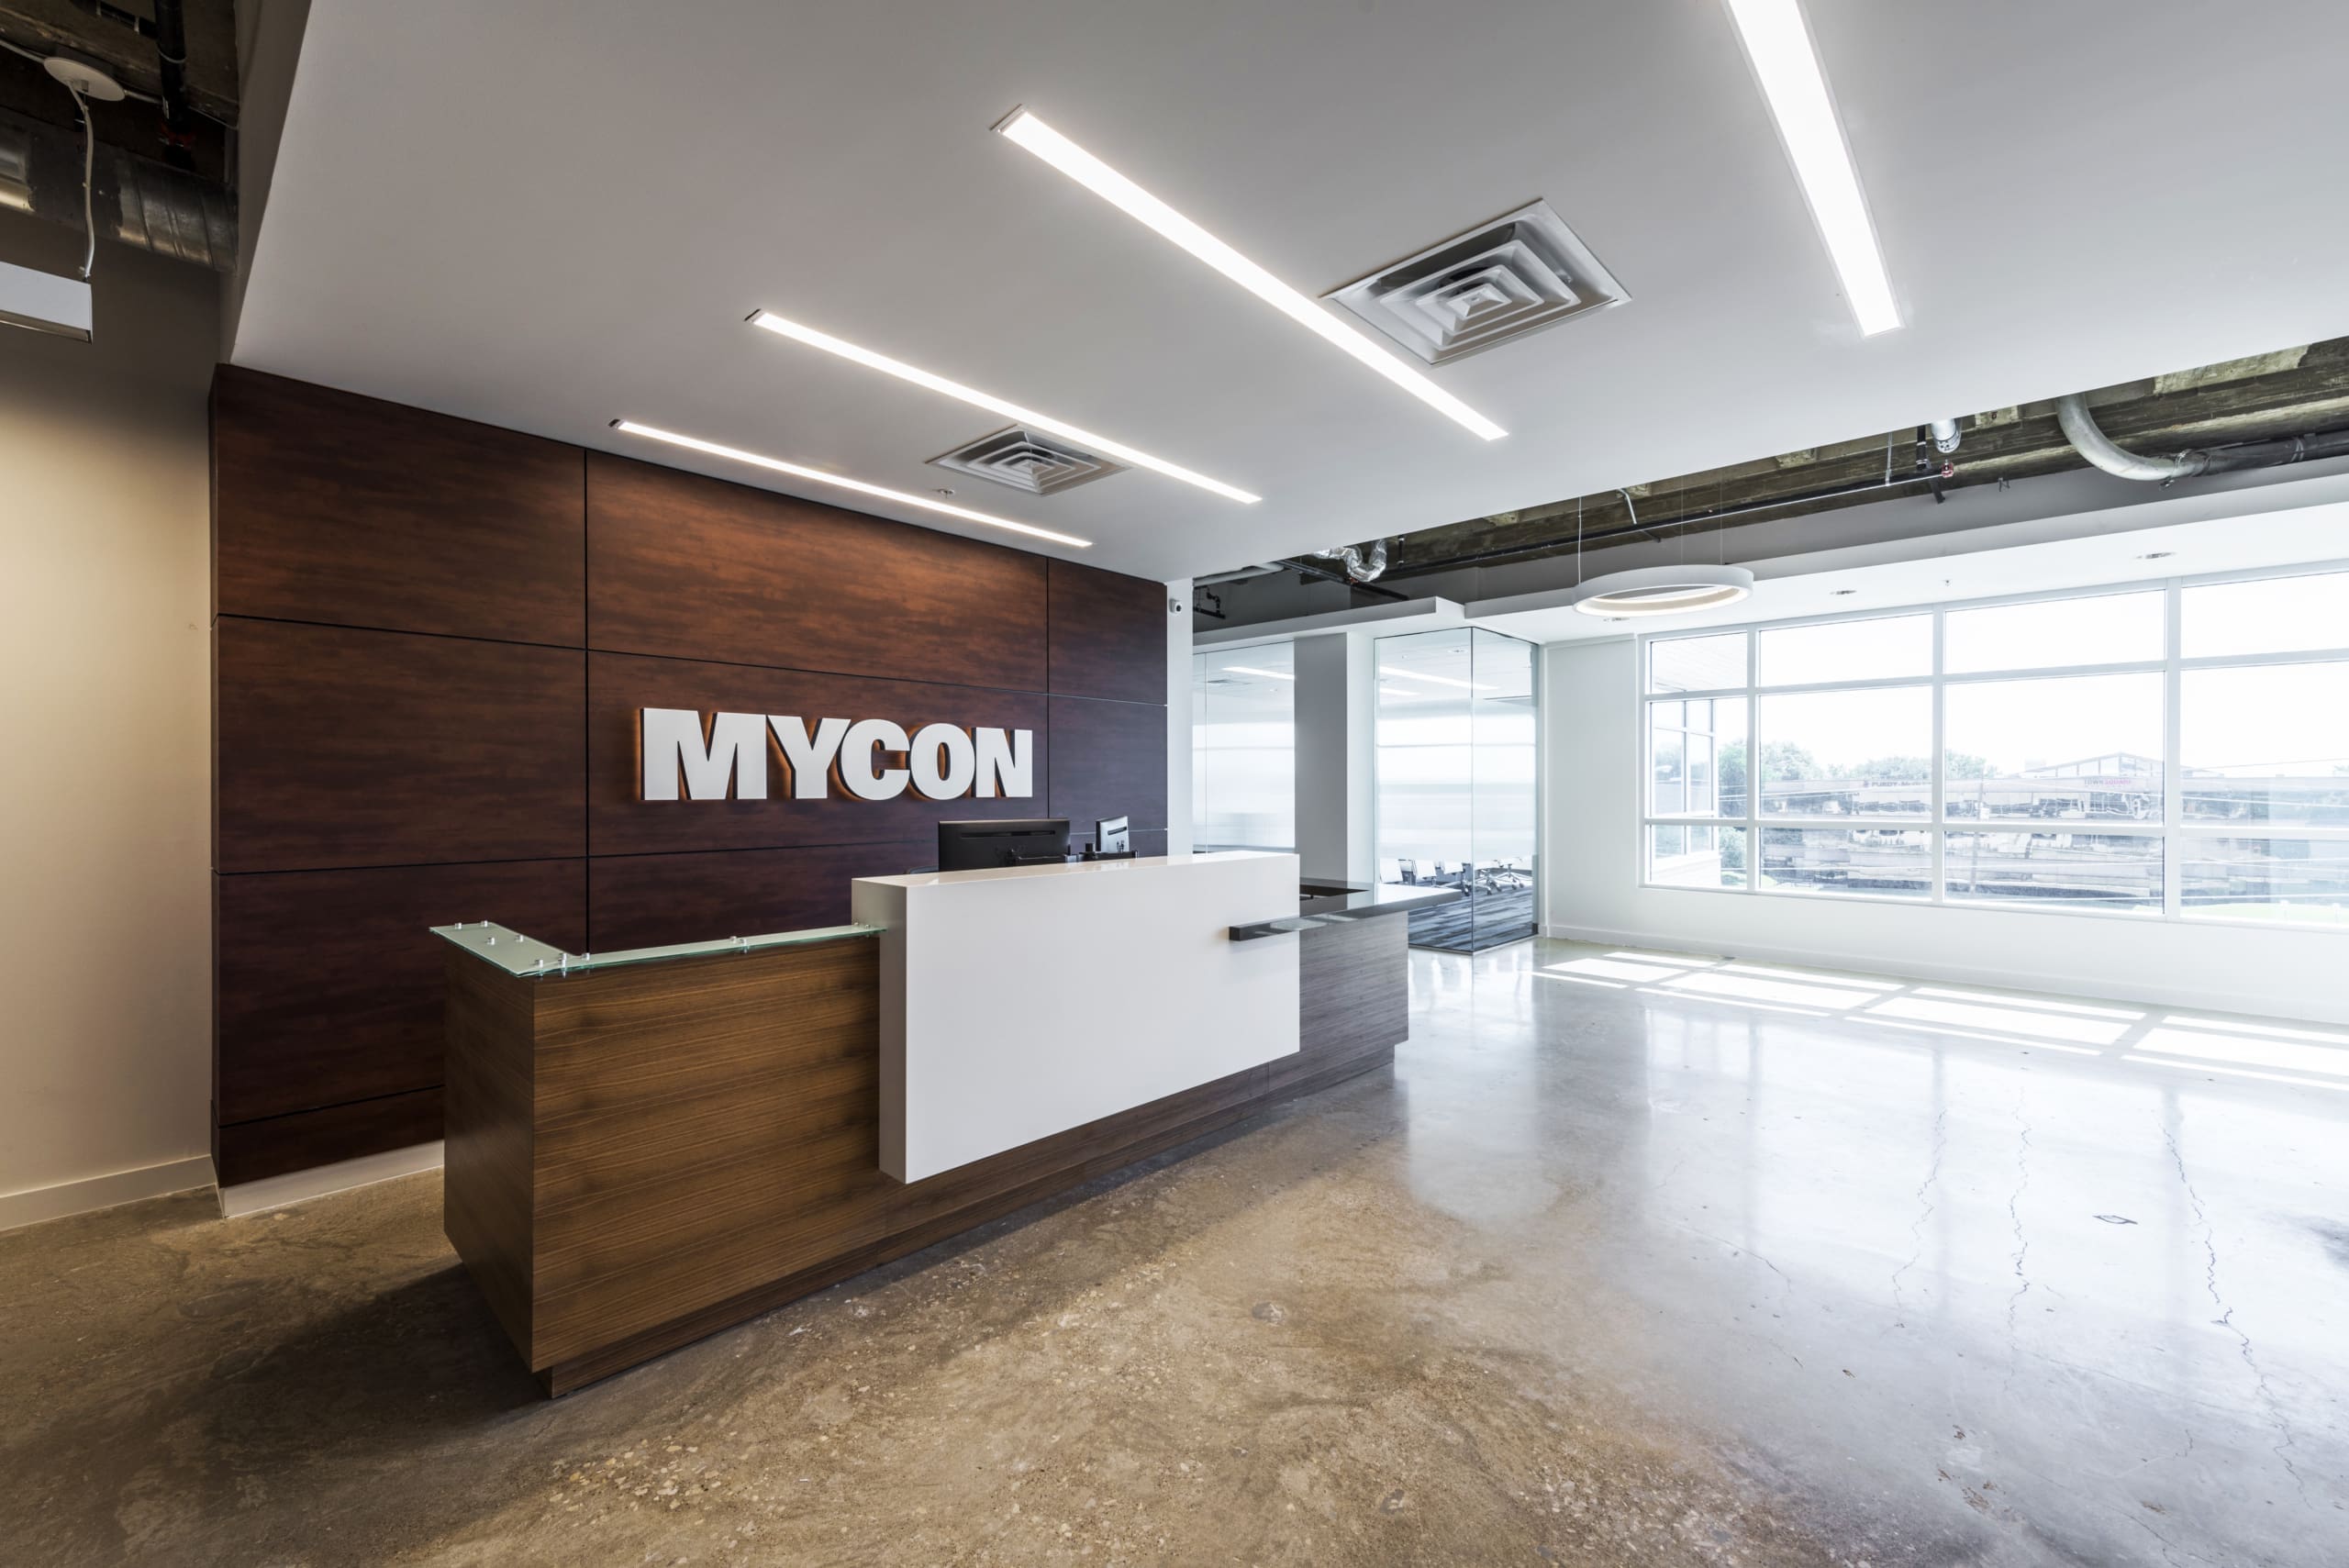 The reception area of an office with the word mycom on it.